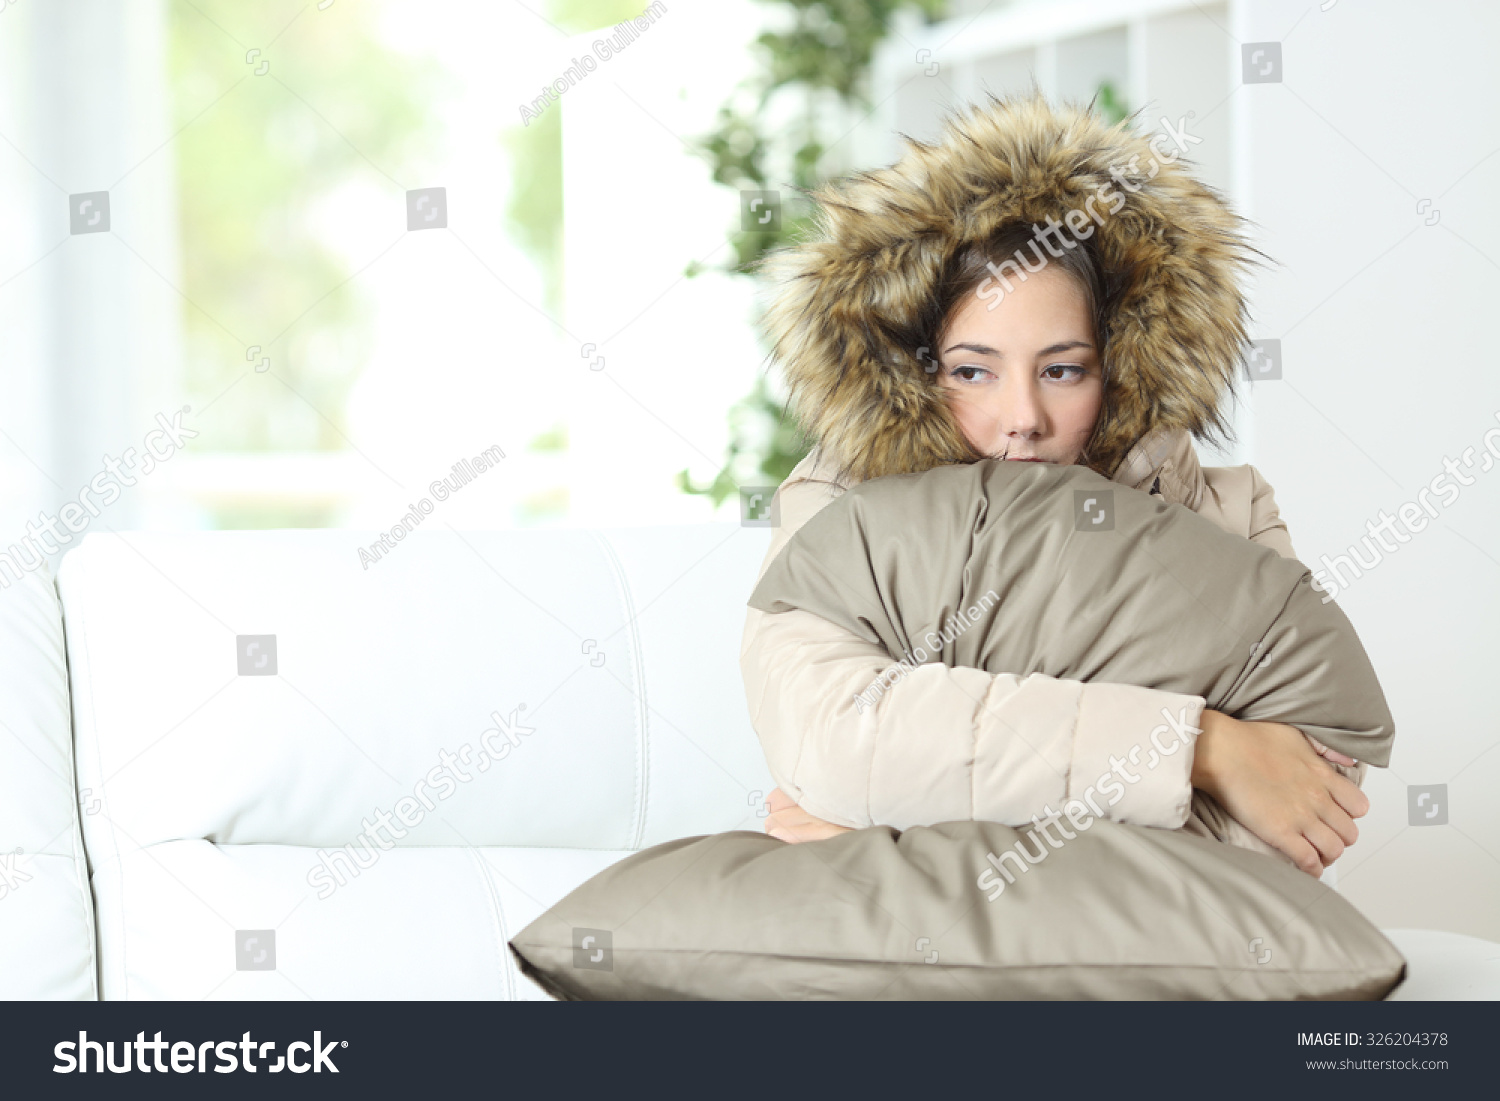 Angry woman warmly clothed in a cold home sitting on a couch #326204378